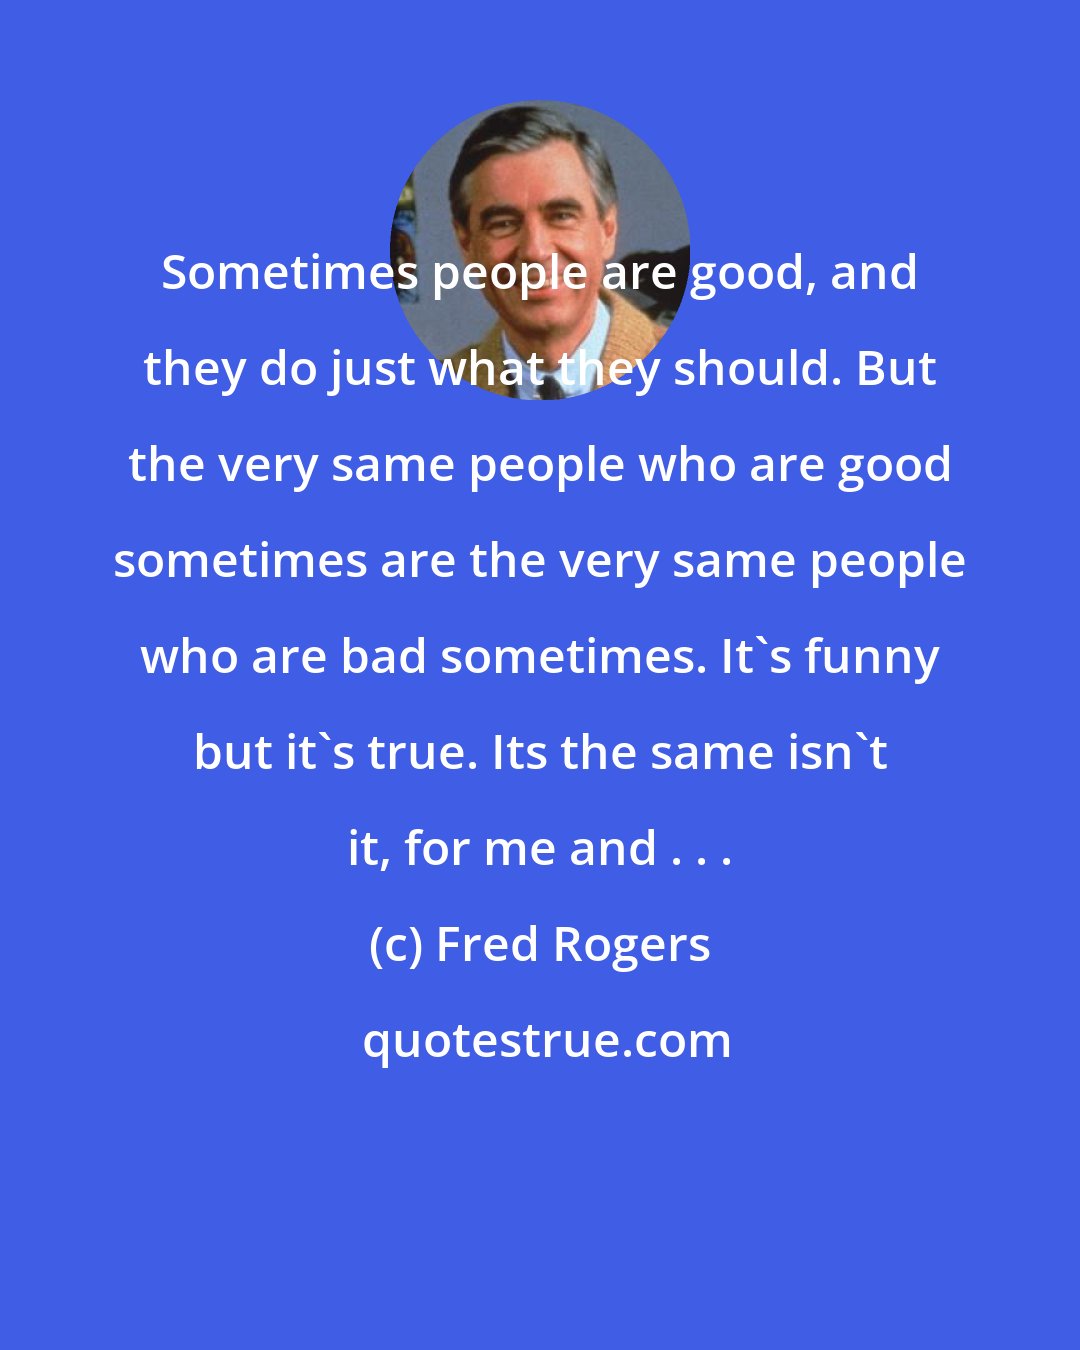 Fred Rogers: Sometimes people are good, and they do just what they should. But the very same people who are good sometimes are the very same people who are bad sometimes. It's funny but it's true. Its the same isn't it, for me and . . .